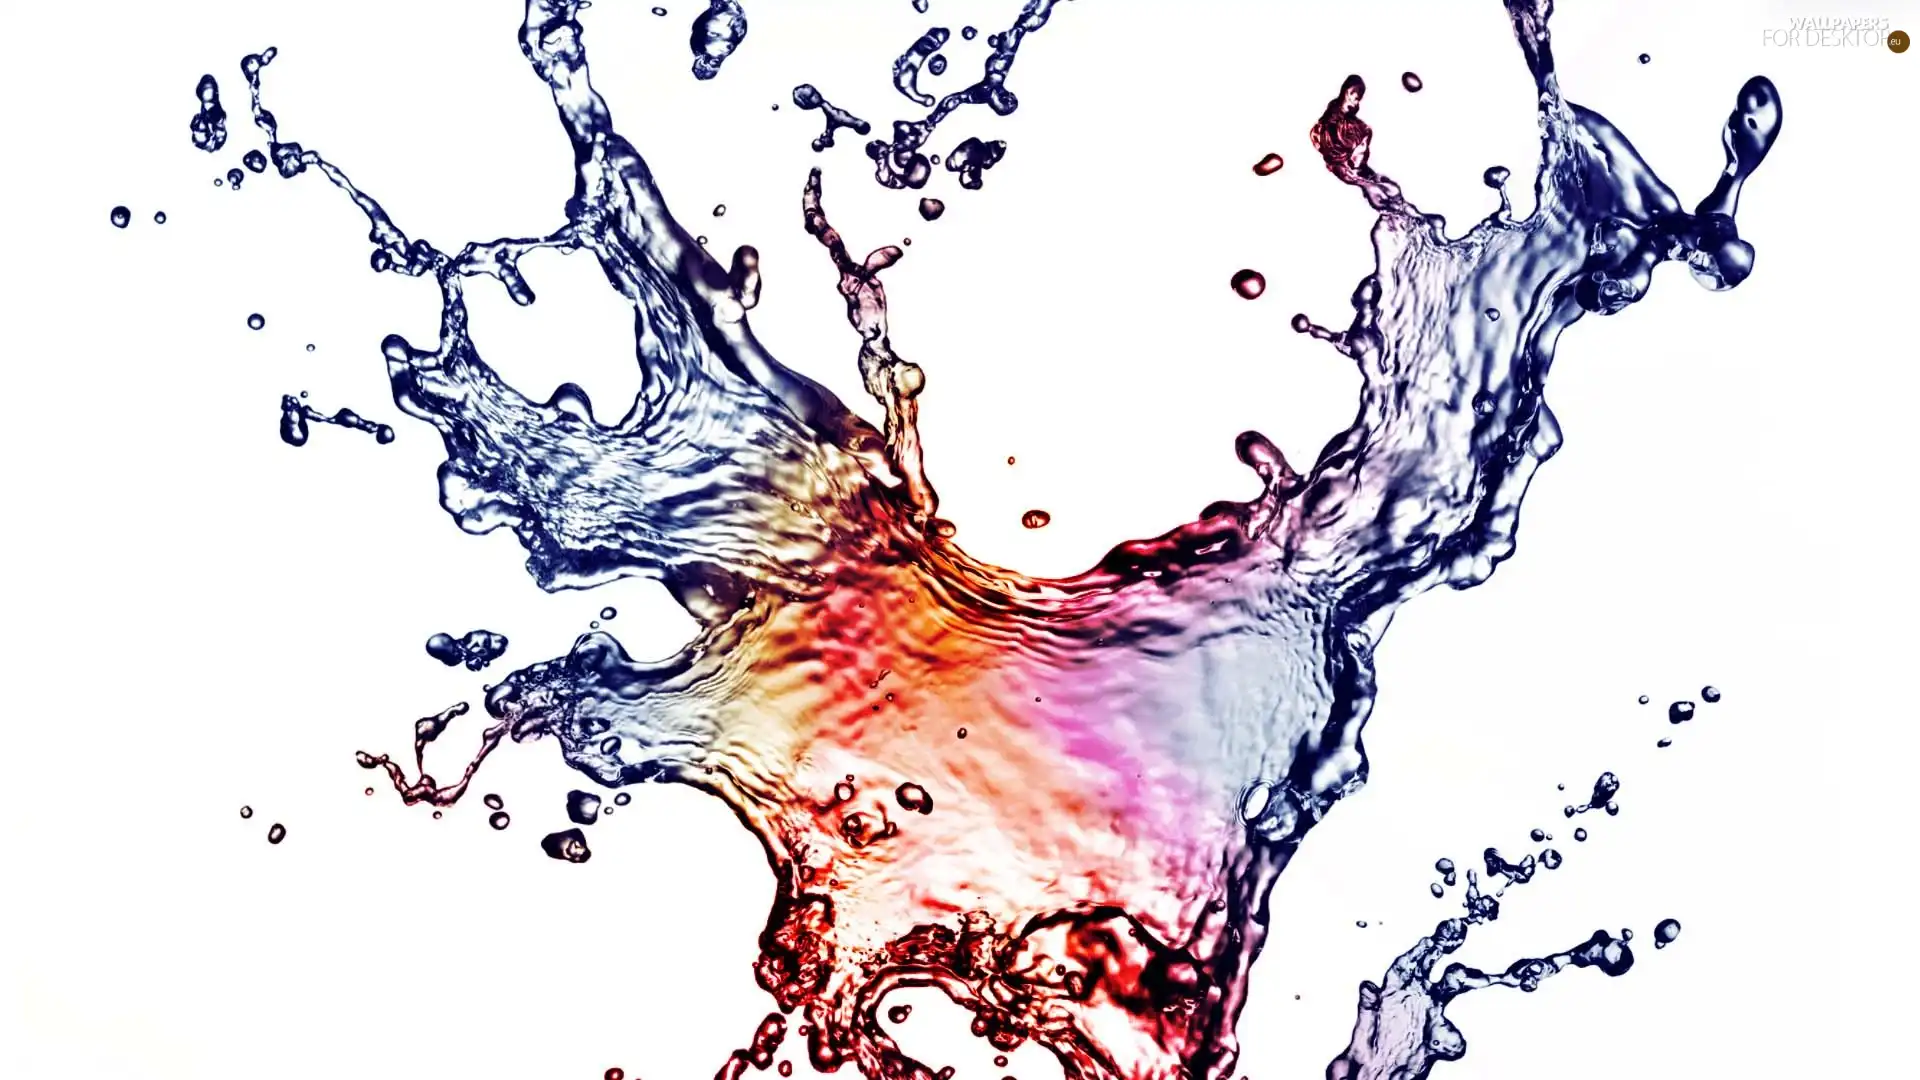 Coloured, water